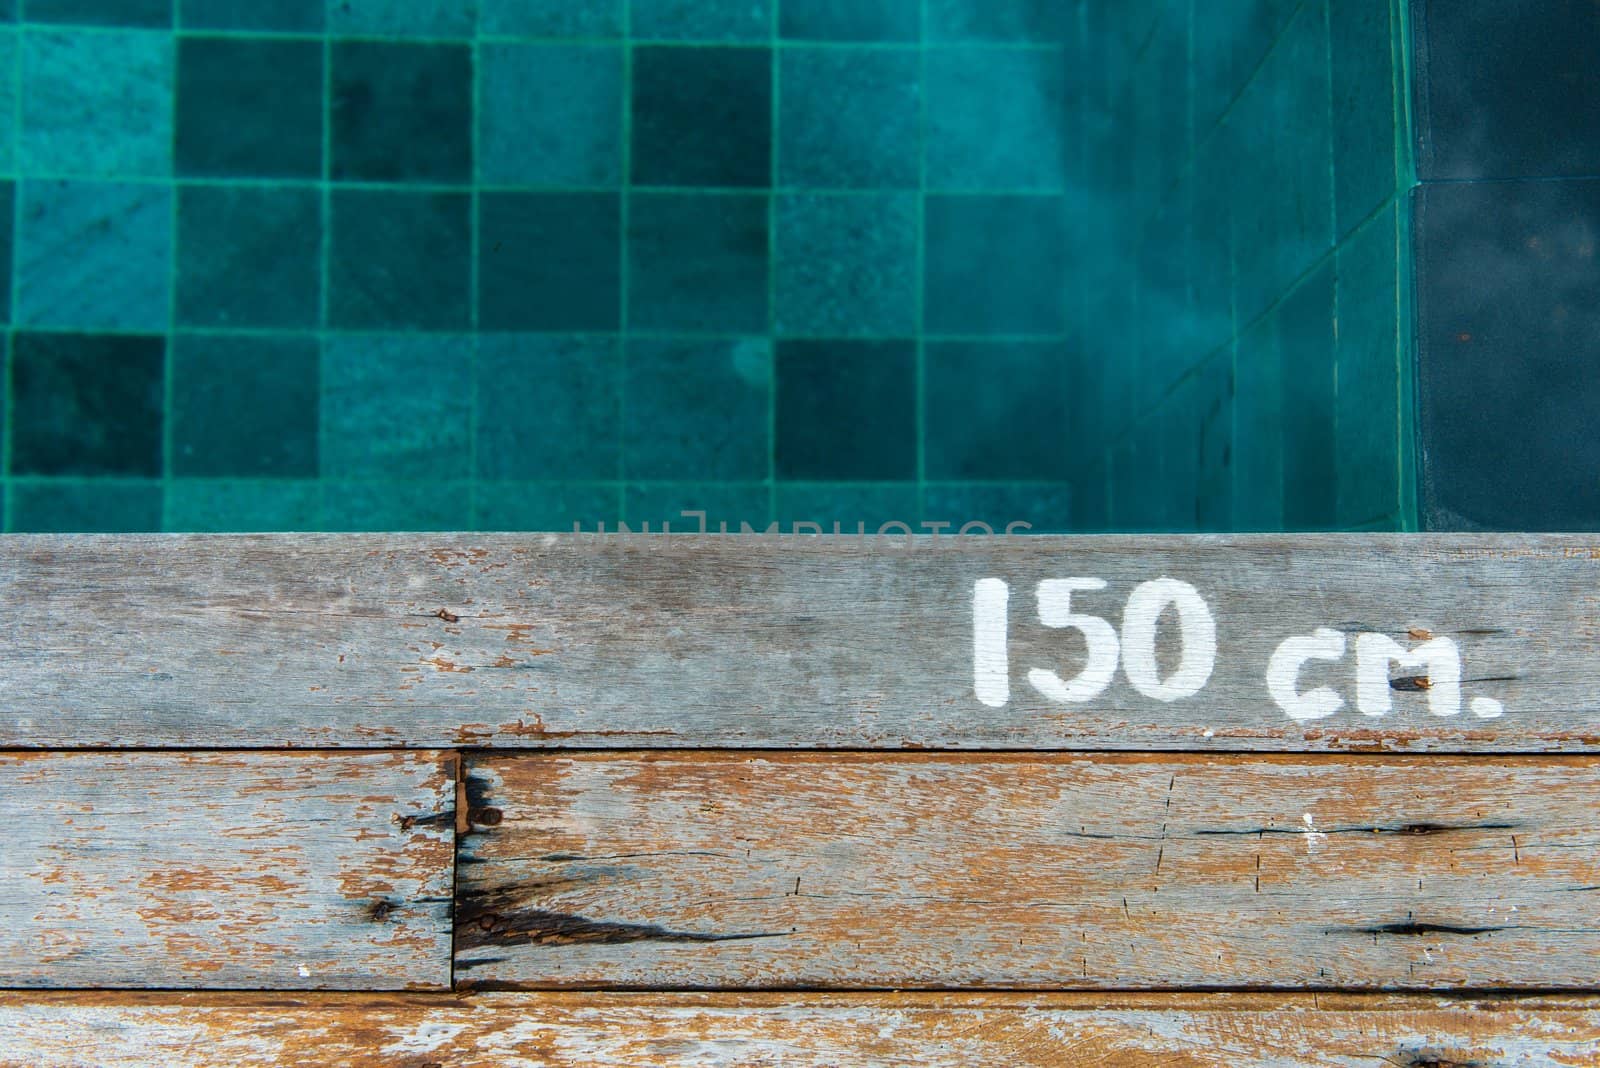 Swimming pool water depth sign on wooden platform, taken on a vertical angle.